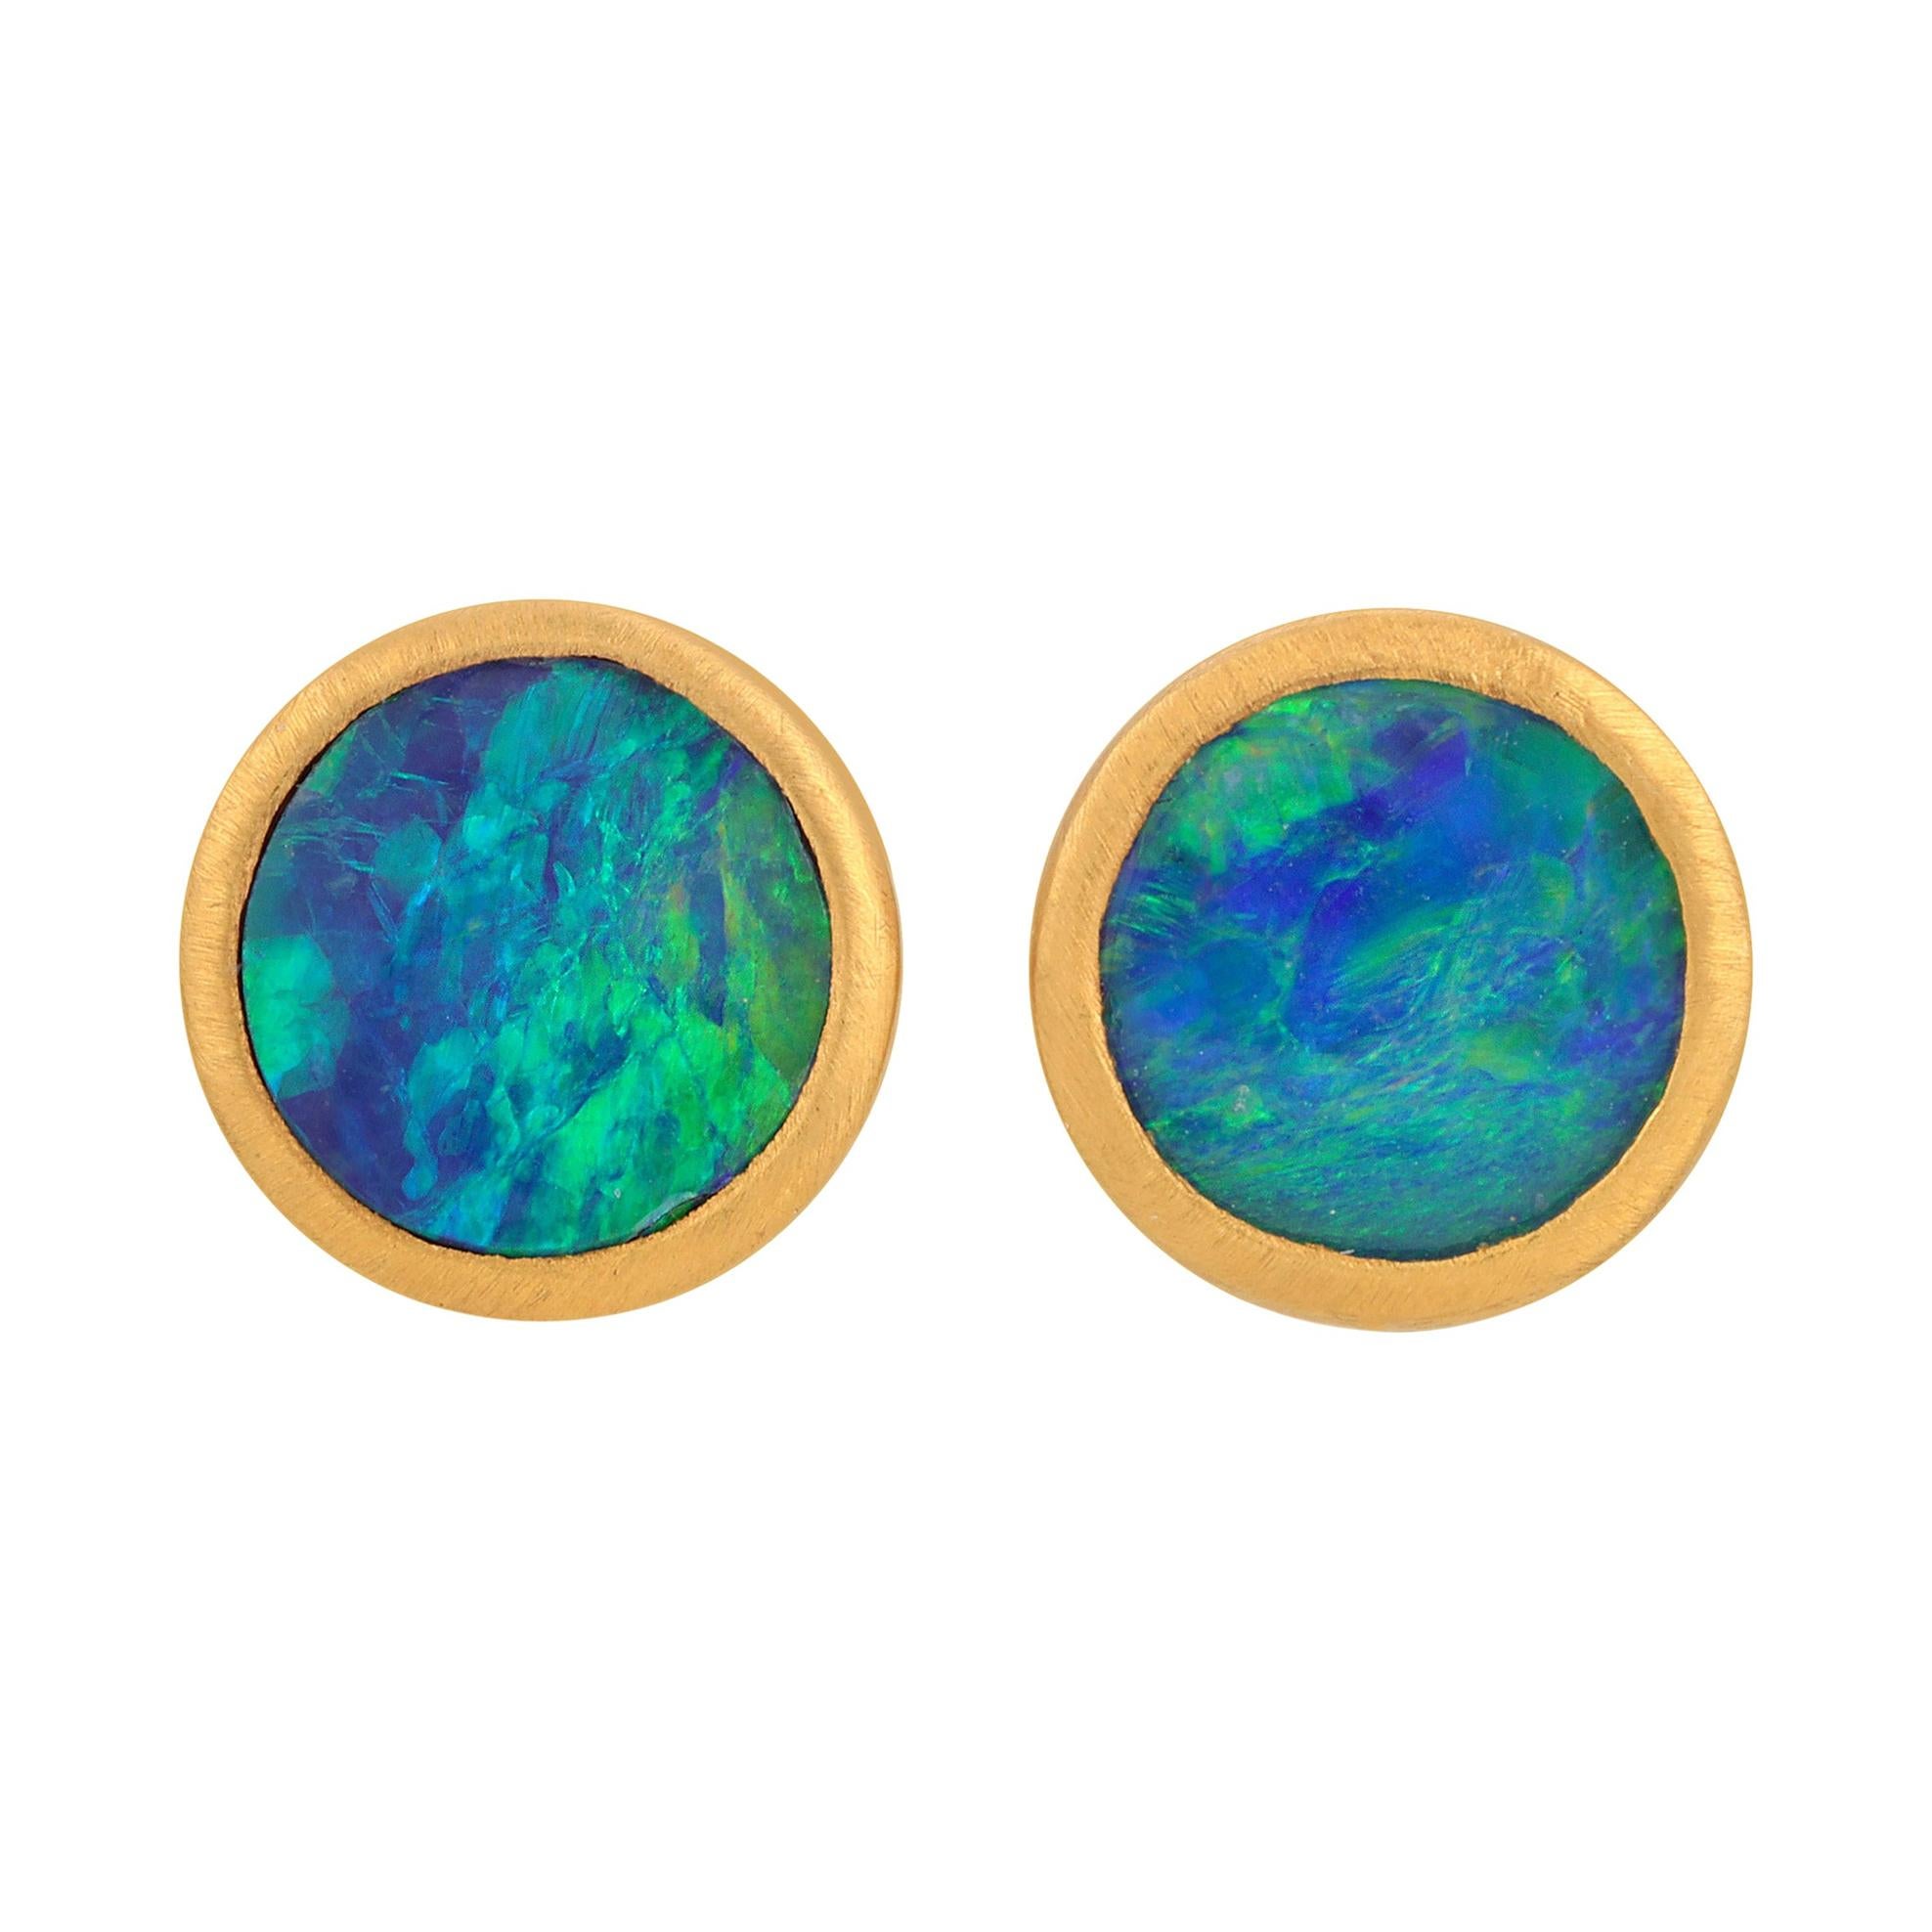 Charming little worlds of color! These  Round Australian Opal Doublet Studs are set in 18k Matte Finish Yellow Gold and are Handmade in Los Angeles by my master goldsmith setter. 